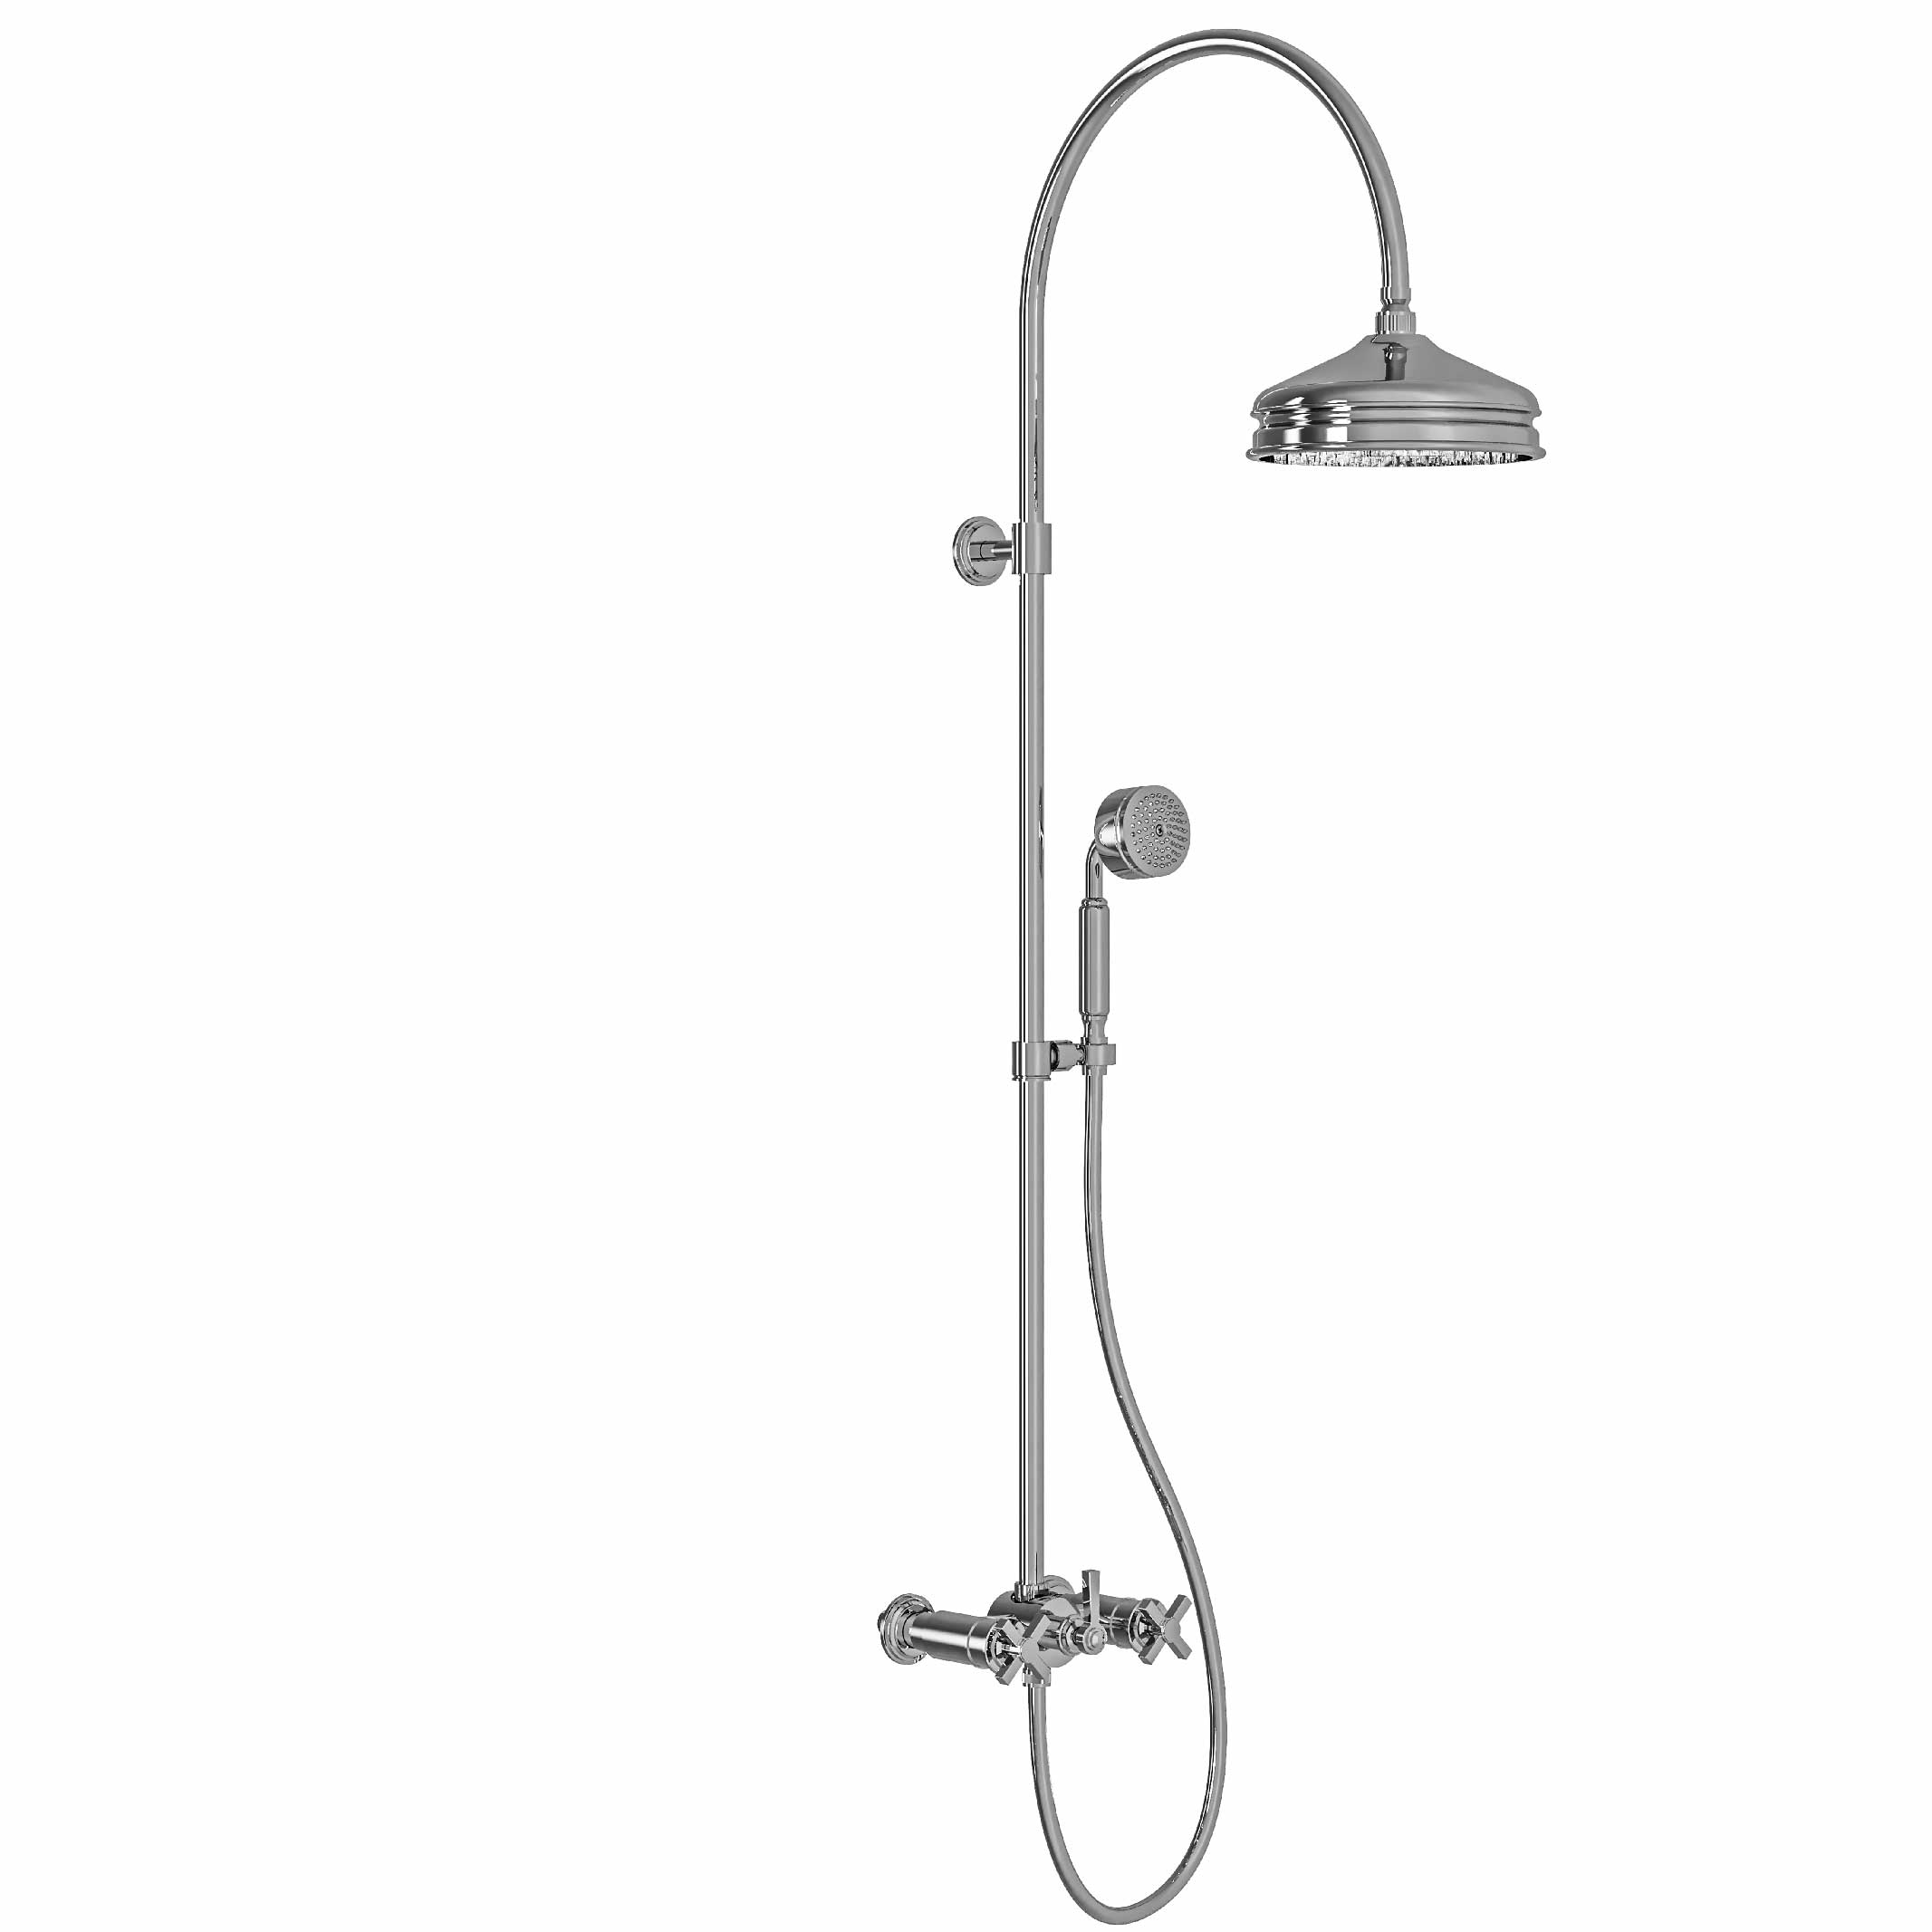 M60-2204 Shower mixer with column, anti-scaling